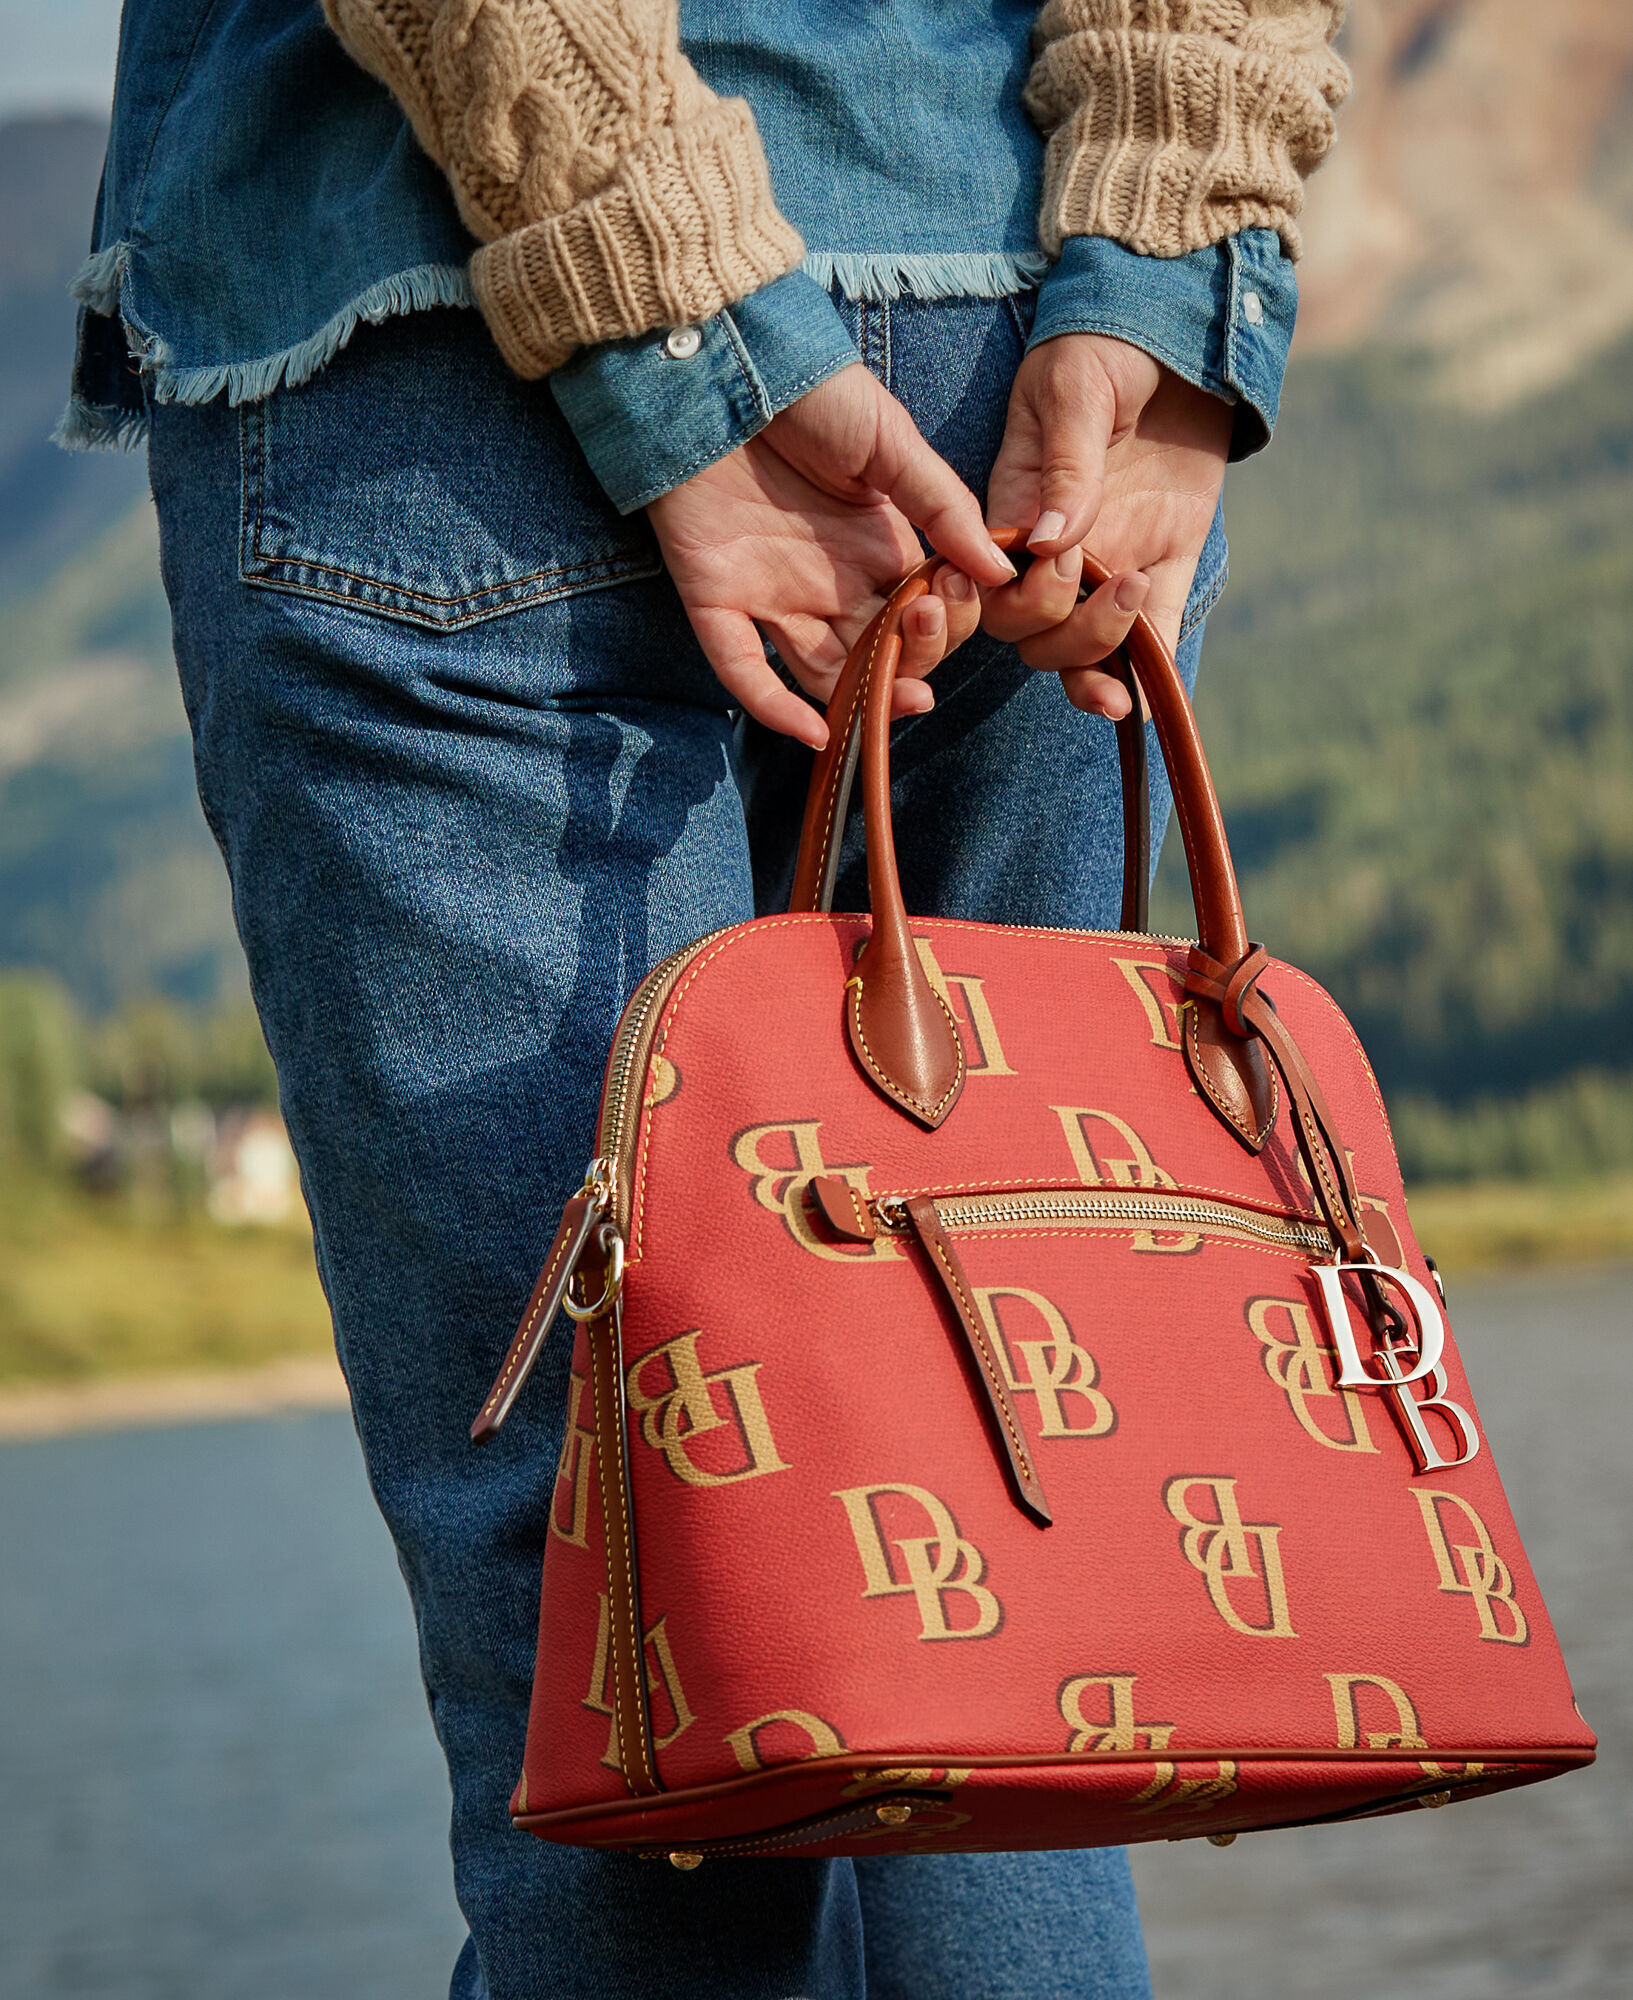 Dooney and Bourke Coated Cotton Coated CanvasDooney Luxury handbags made  from Coated Canvas